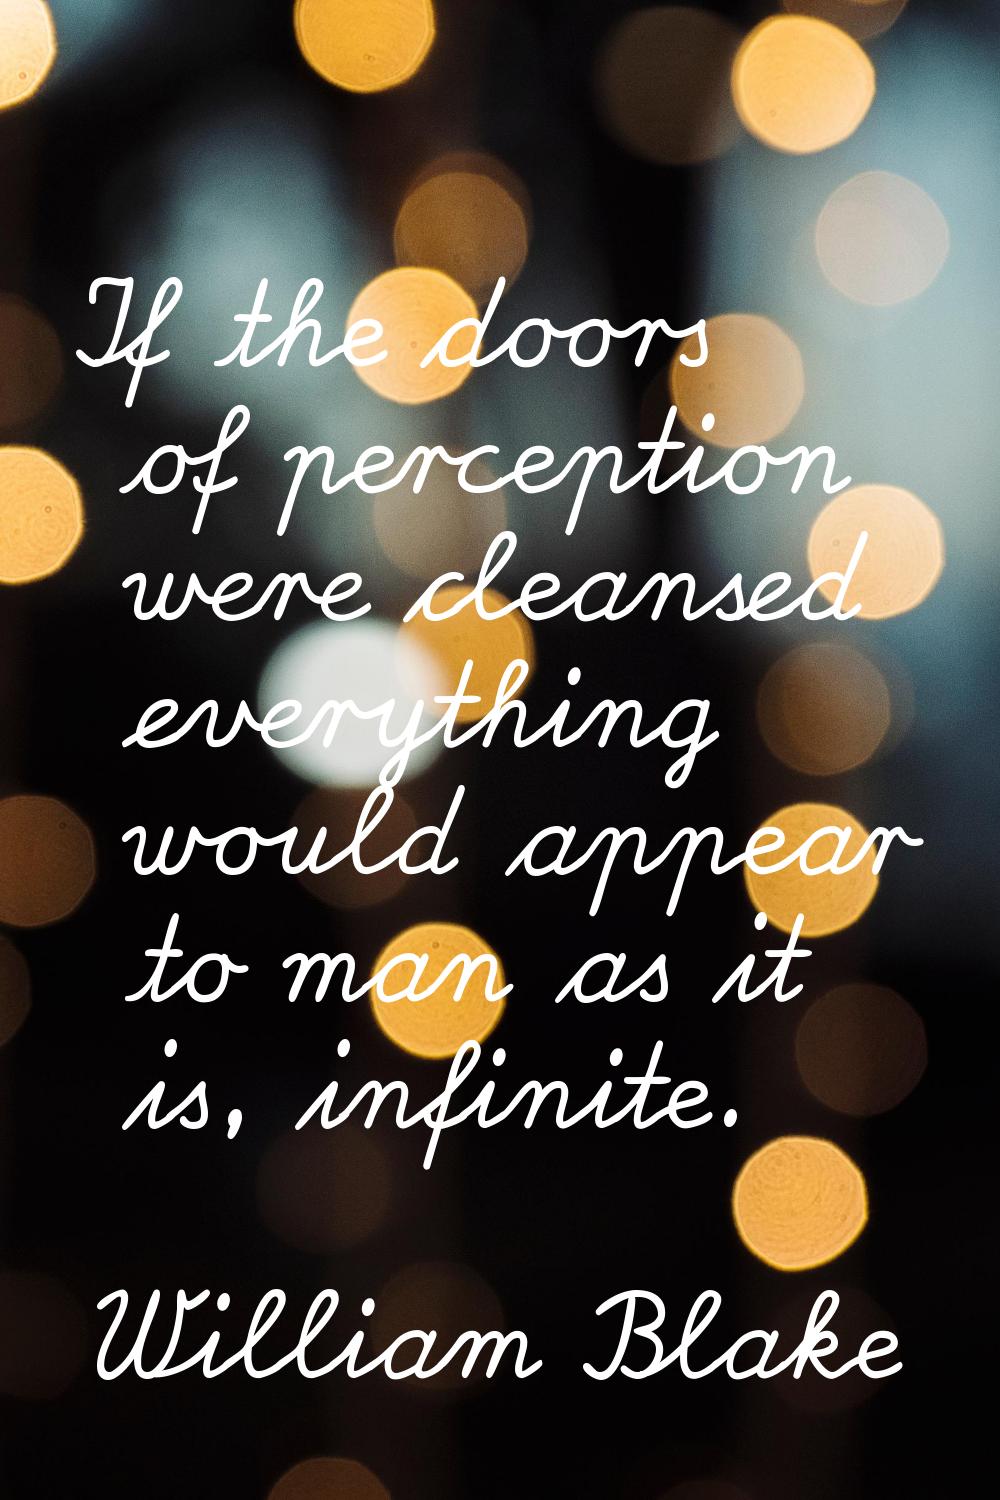 If the doors of perception were cleansed everything would appear to man as it is, infinite.